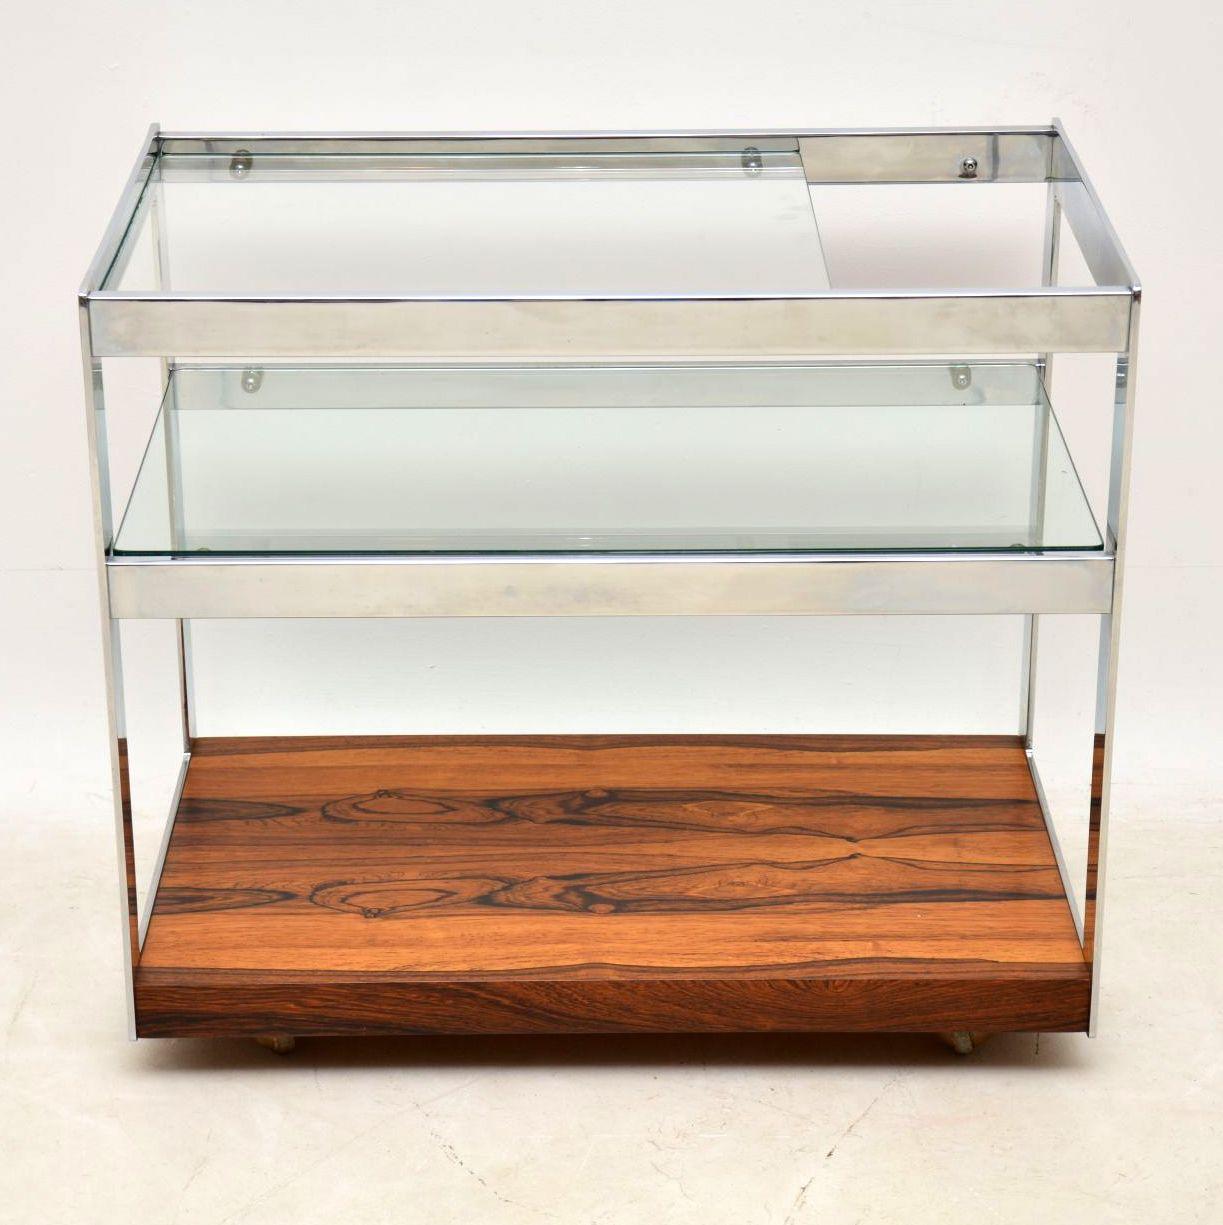 A stunning vintage drinks trolley from the 1970s, this was designed by Richard Young for Merrow associates. It’s of superb quality, with a thick chrome frame and a beautiful wood base. The condition is superb for its age, with only some incredibly